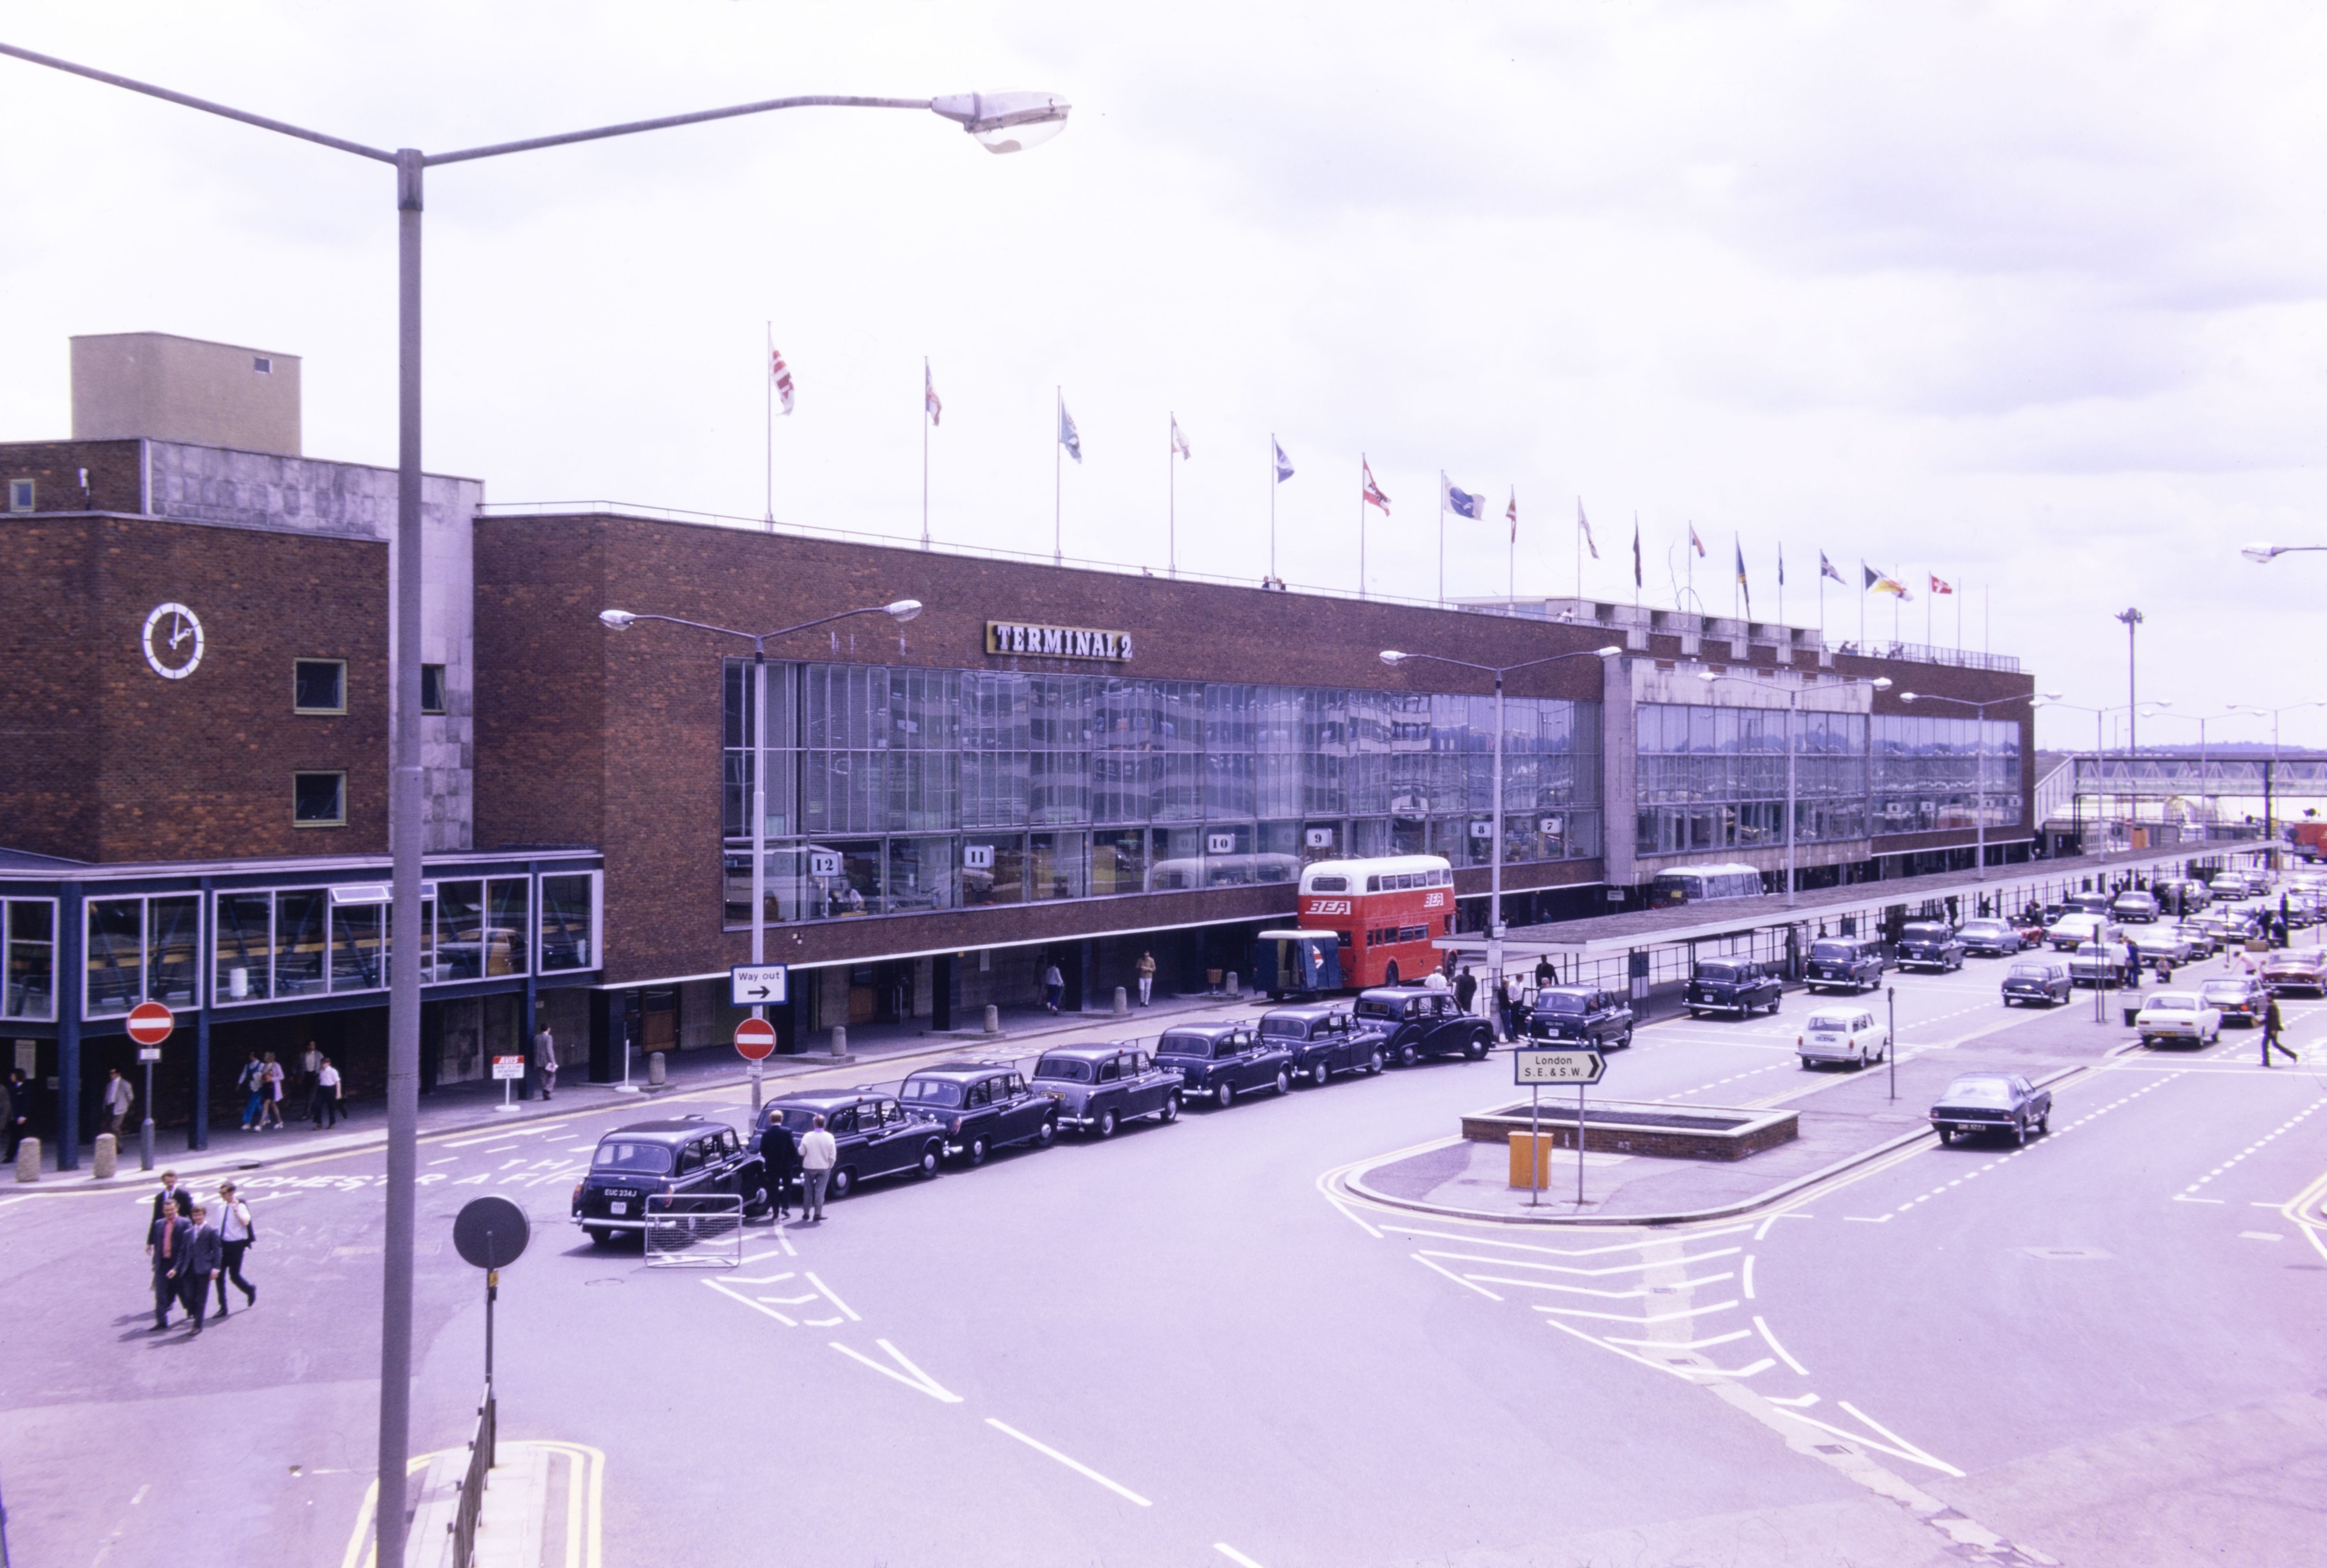 A photo of the old terminal building at London Heathrow Airport.